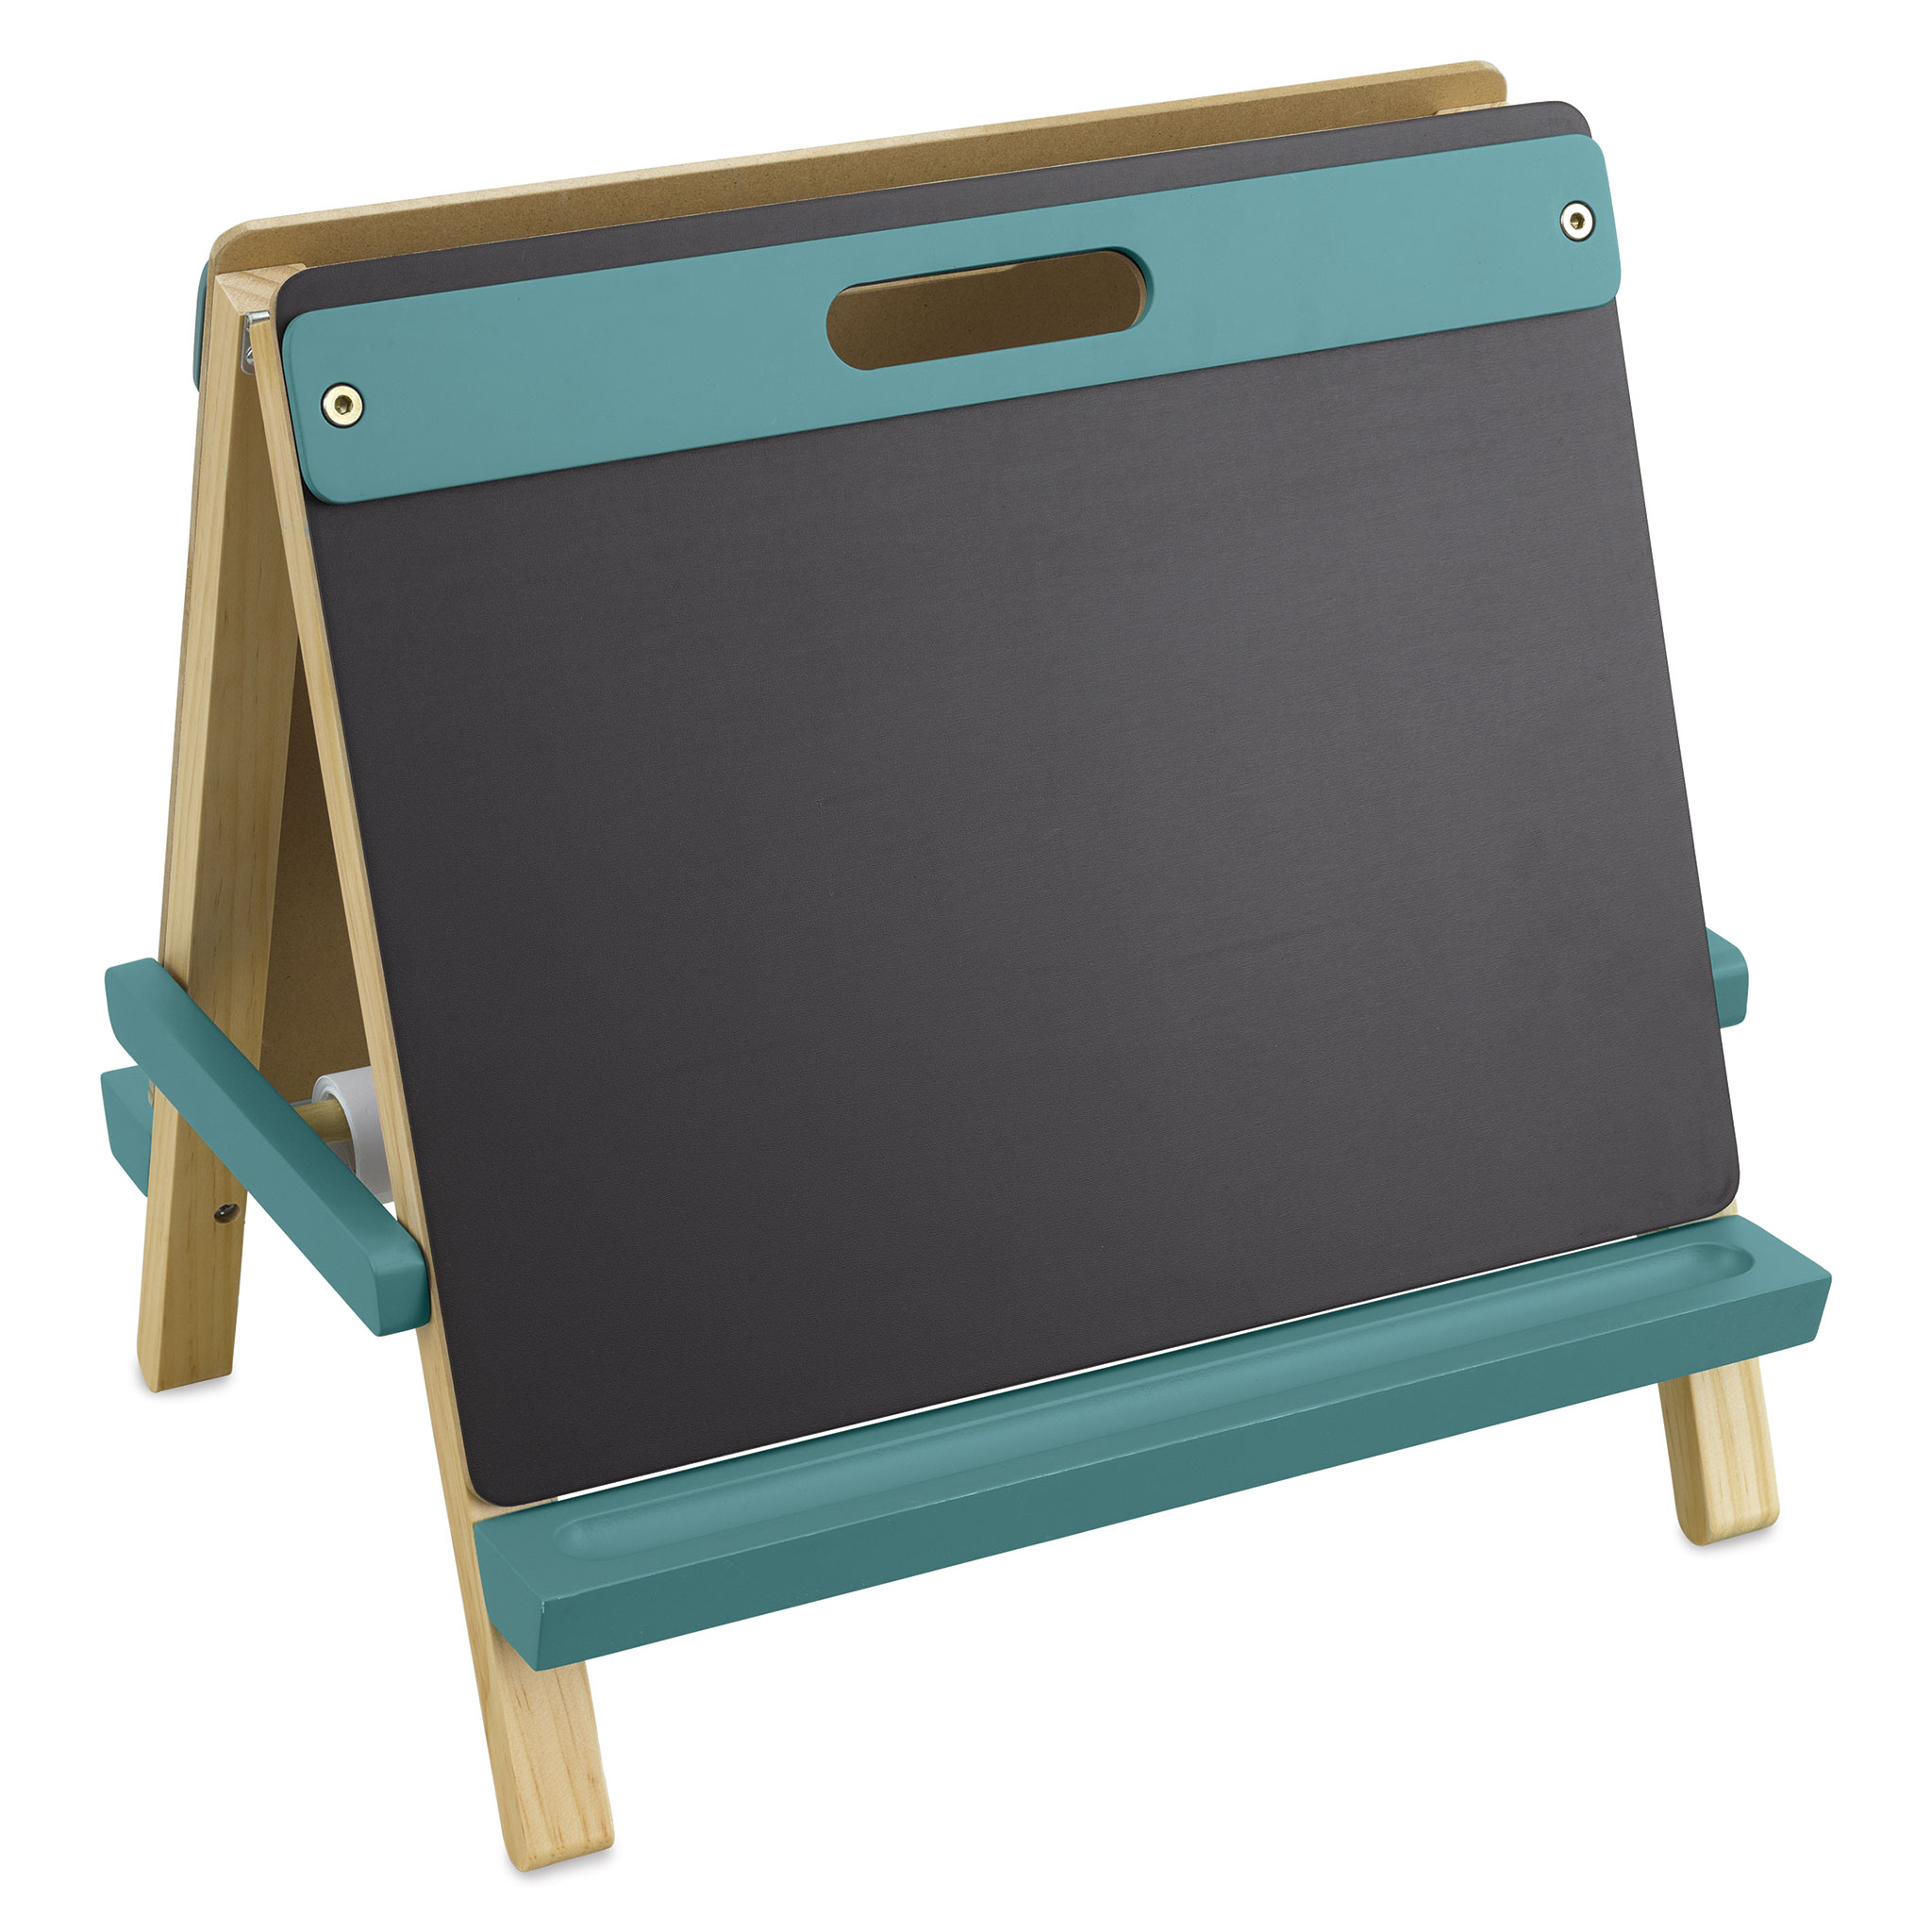 Childcraft Tabletop Easel, 21-5/8 x 23 x 22-5/8 Inches